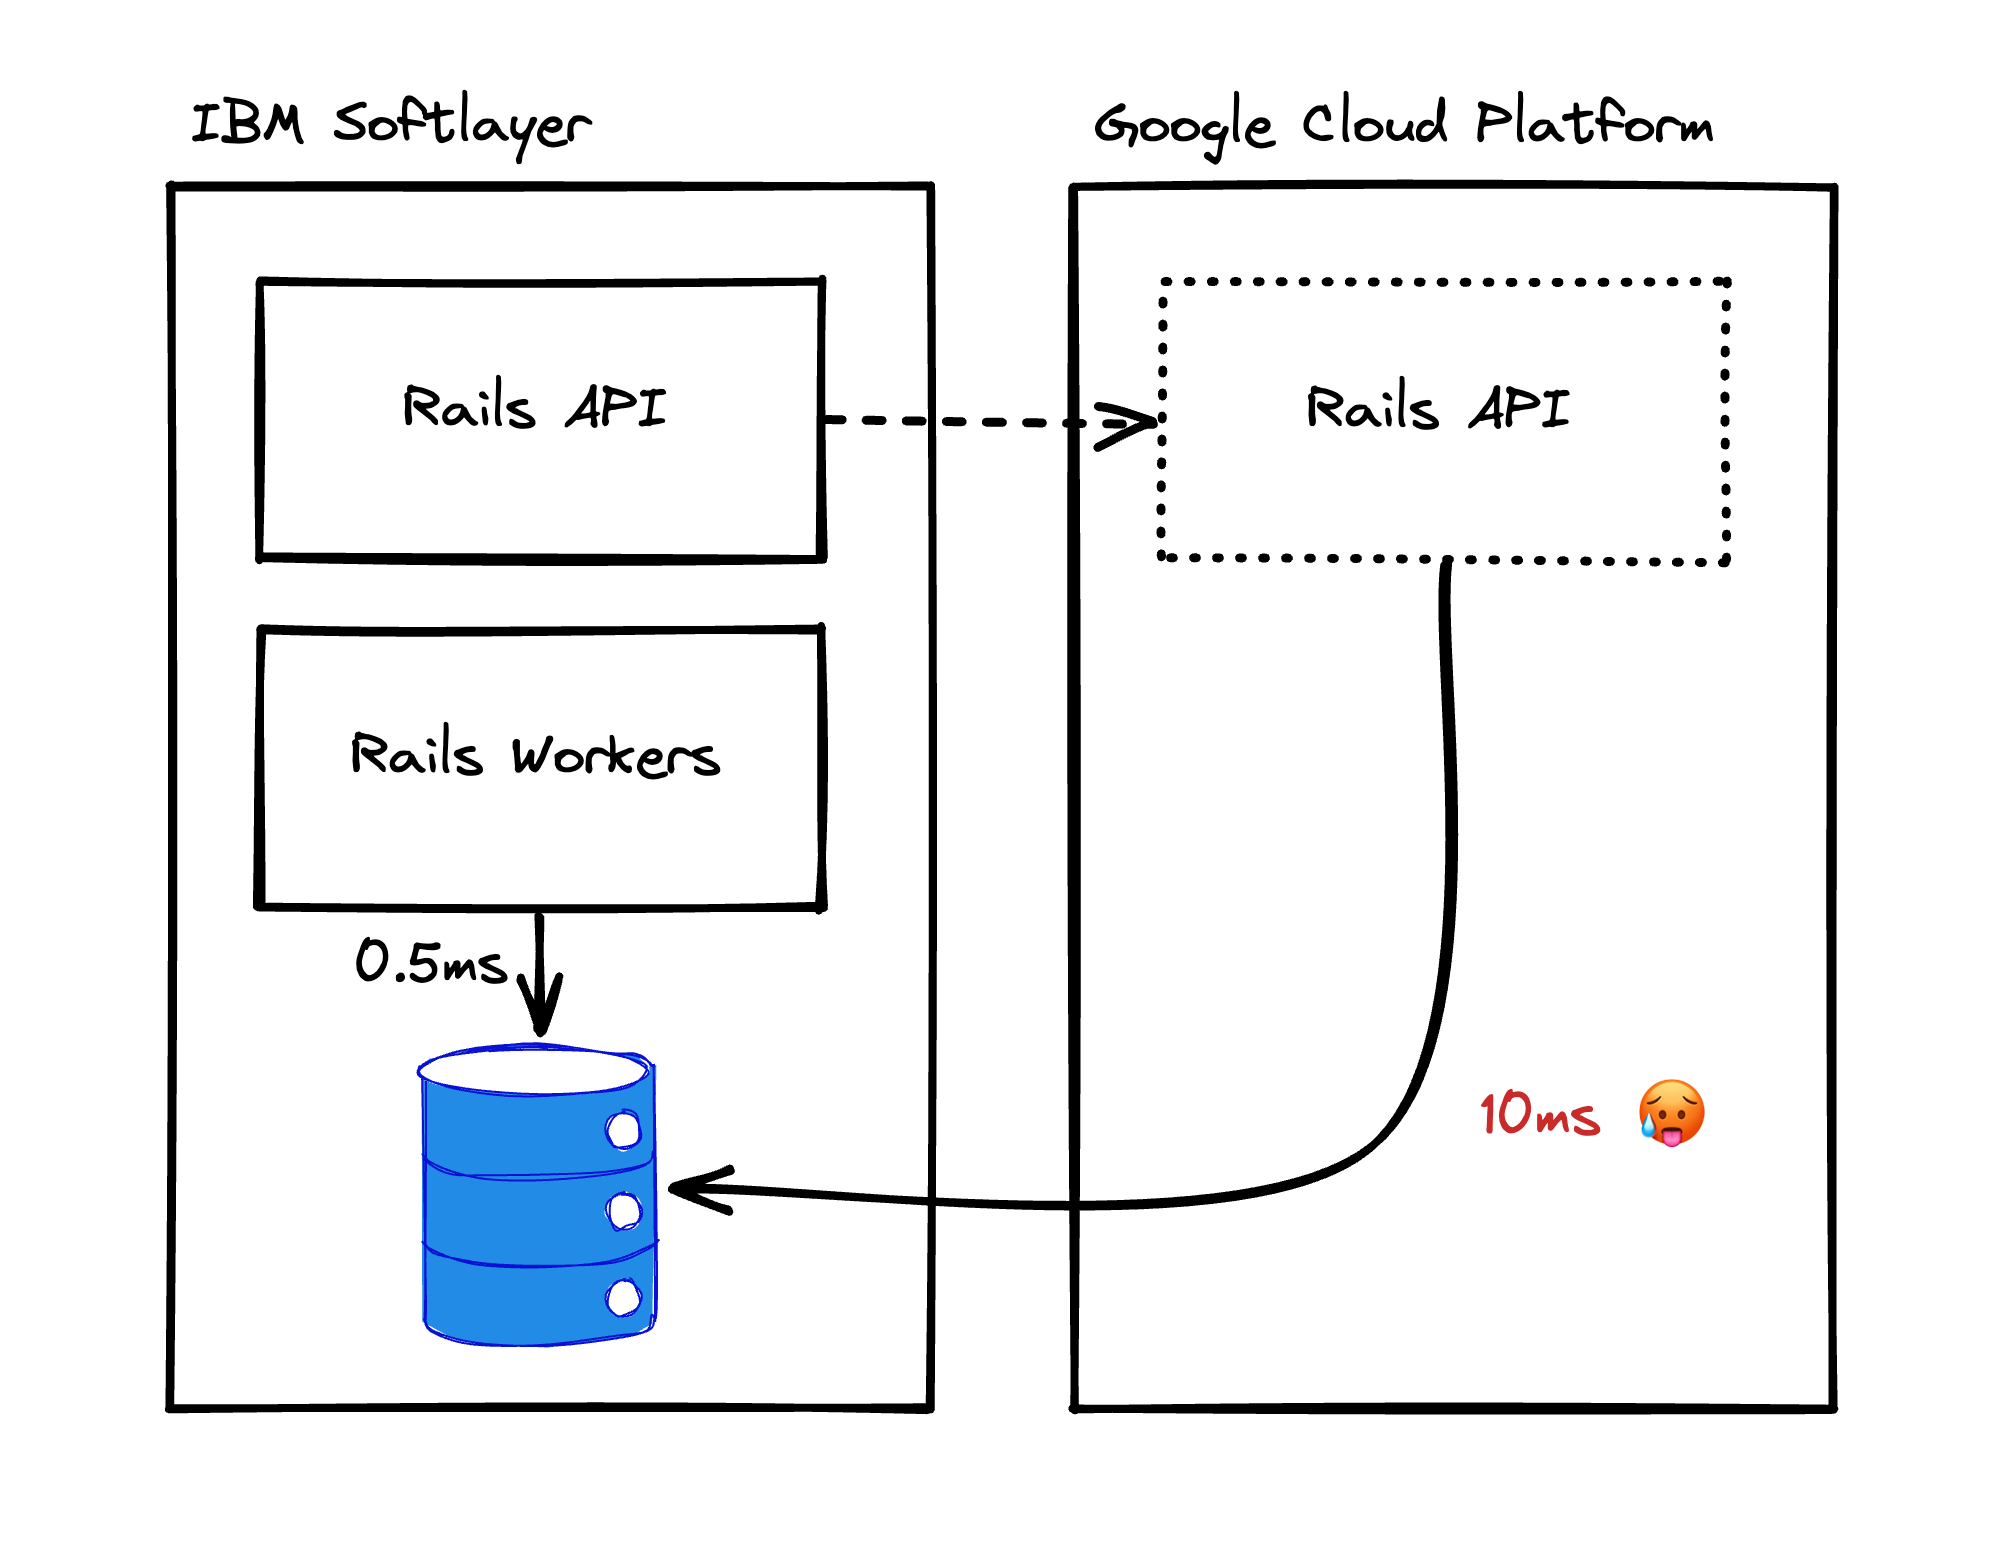 Diagram of Softlayer and GCP, with the two network hops compared and labelled with latency